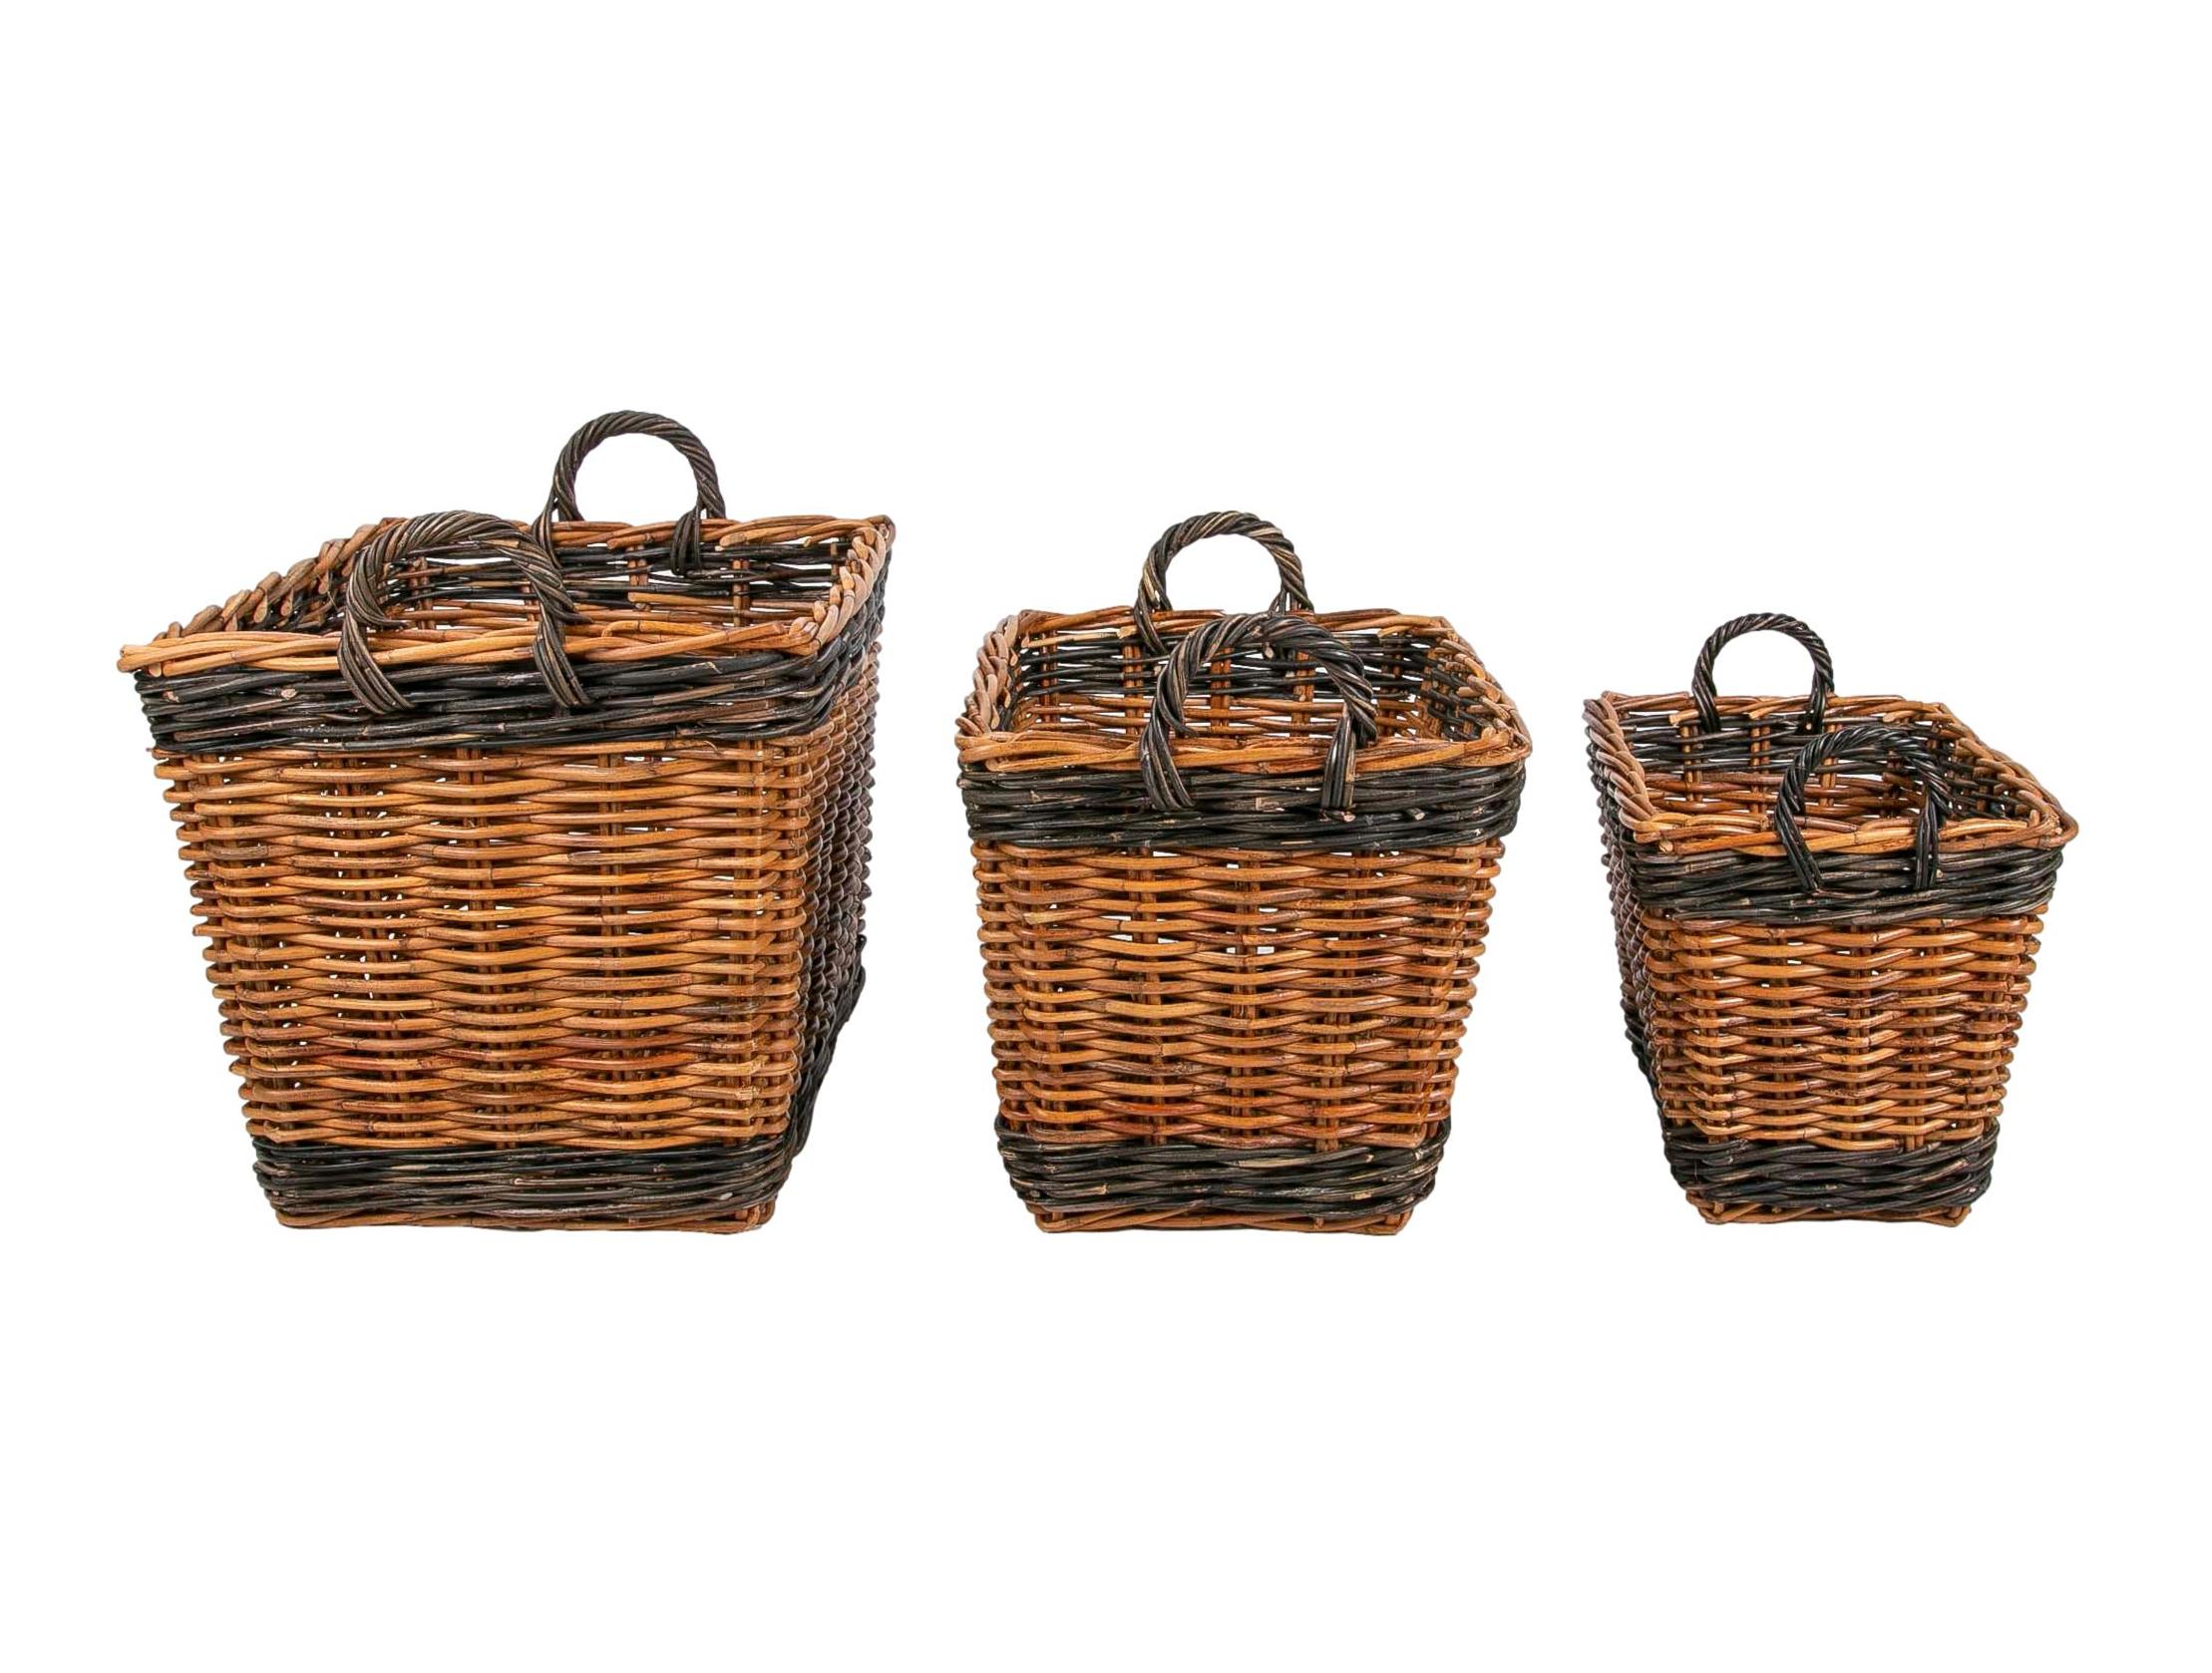 European Set Consisting of Three Decorative Wicker Baskets of Different Sizes For Sale